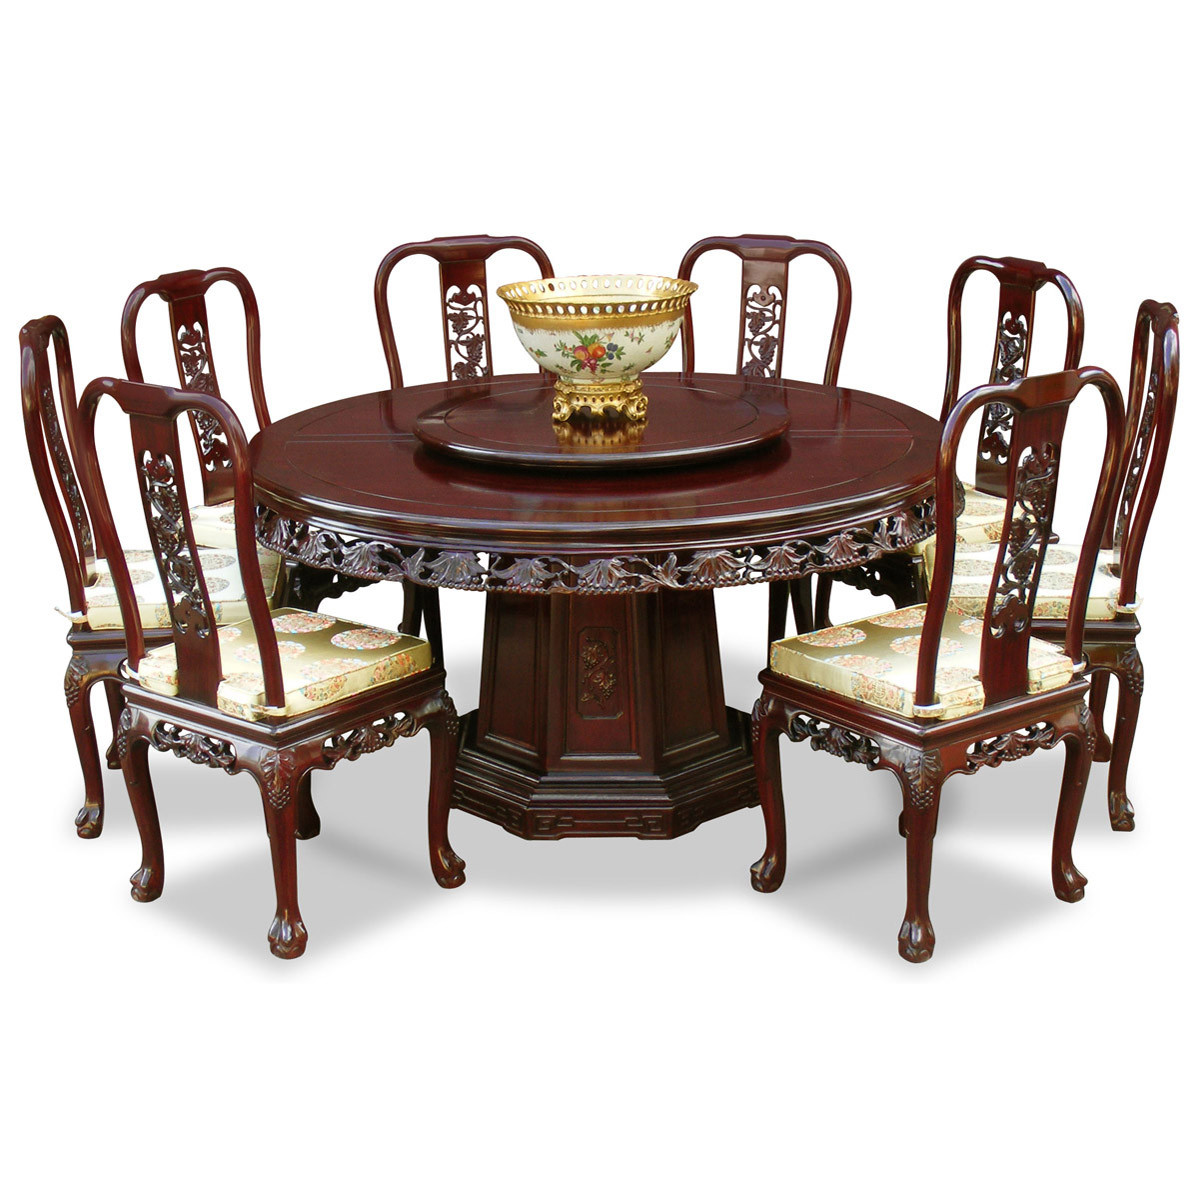 8 Chair Dinner Table
 60in Rosewood Queen Ann Grape Motif Round Dining Table